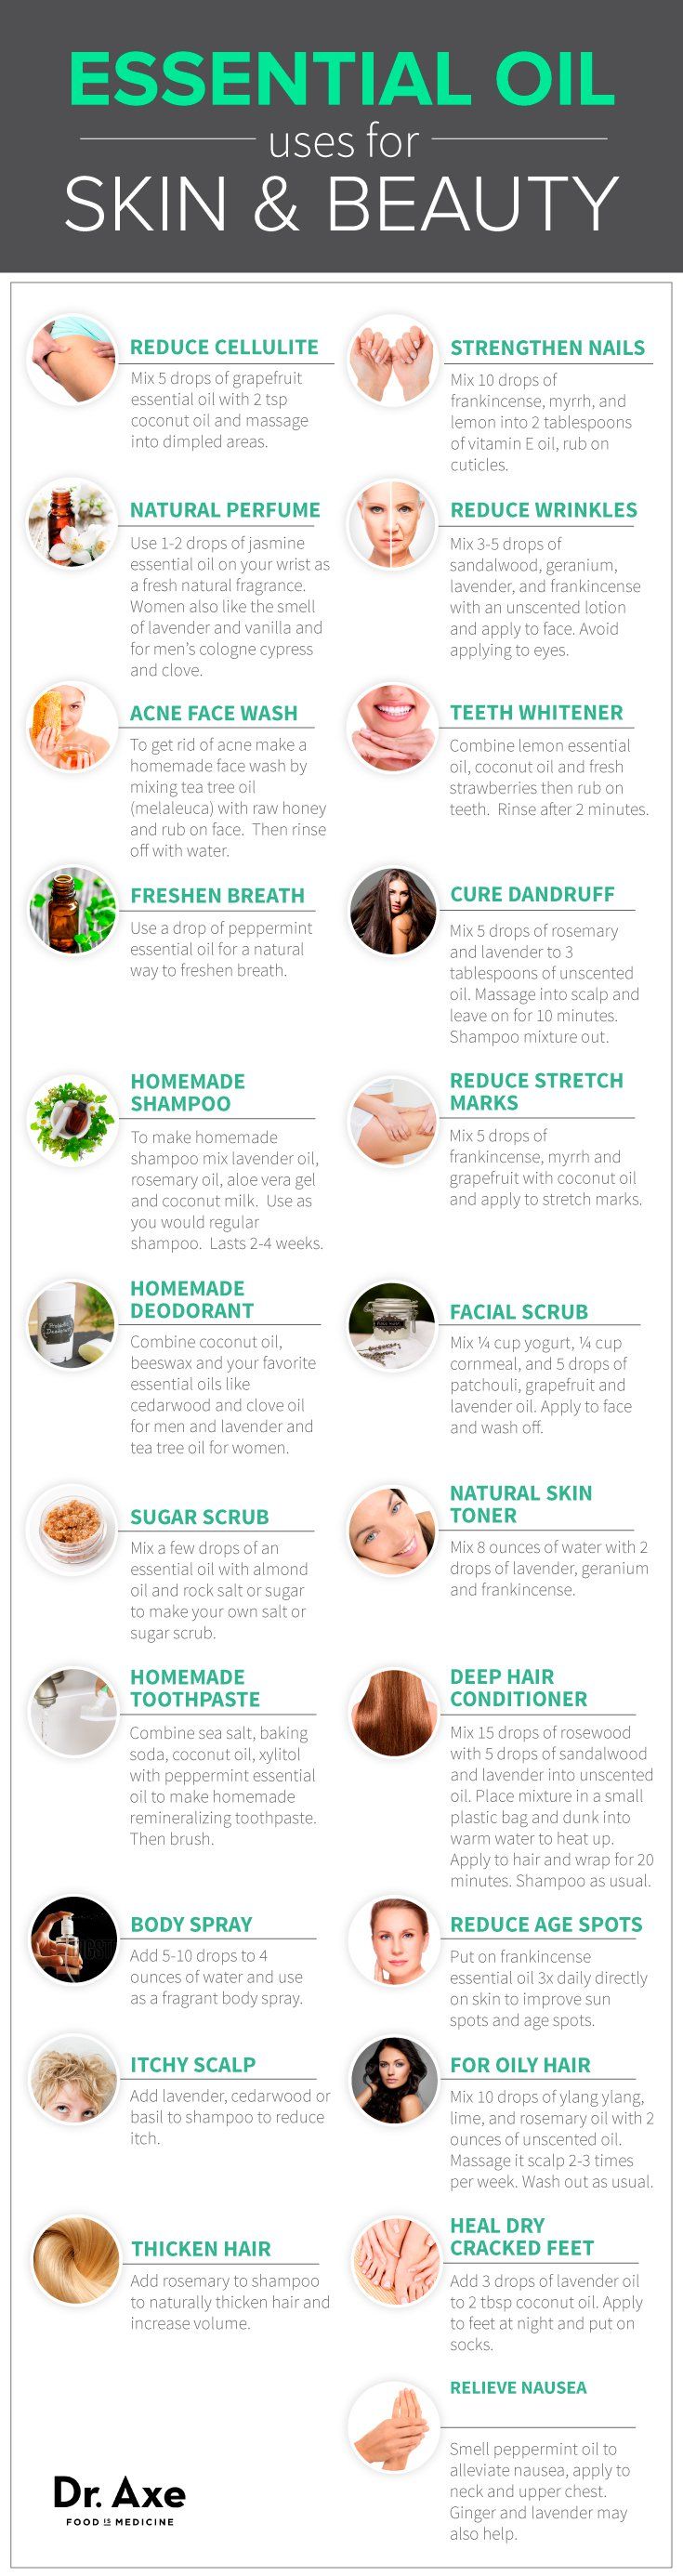 Essential Oil Recipes For All Your Skin Care And Beauty Needs Infographic